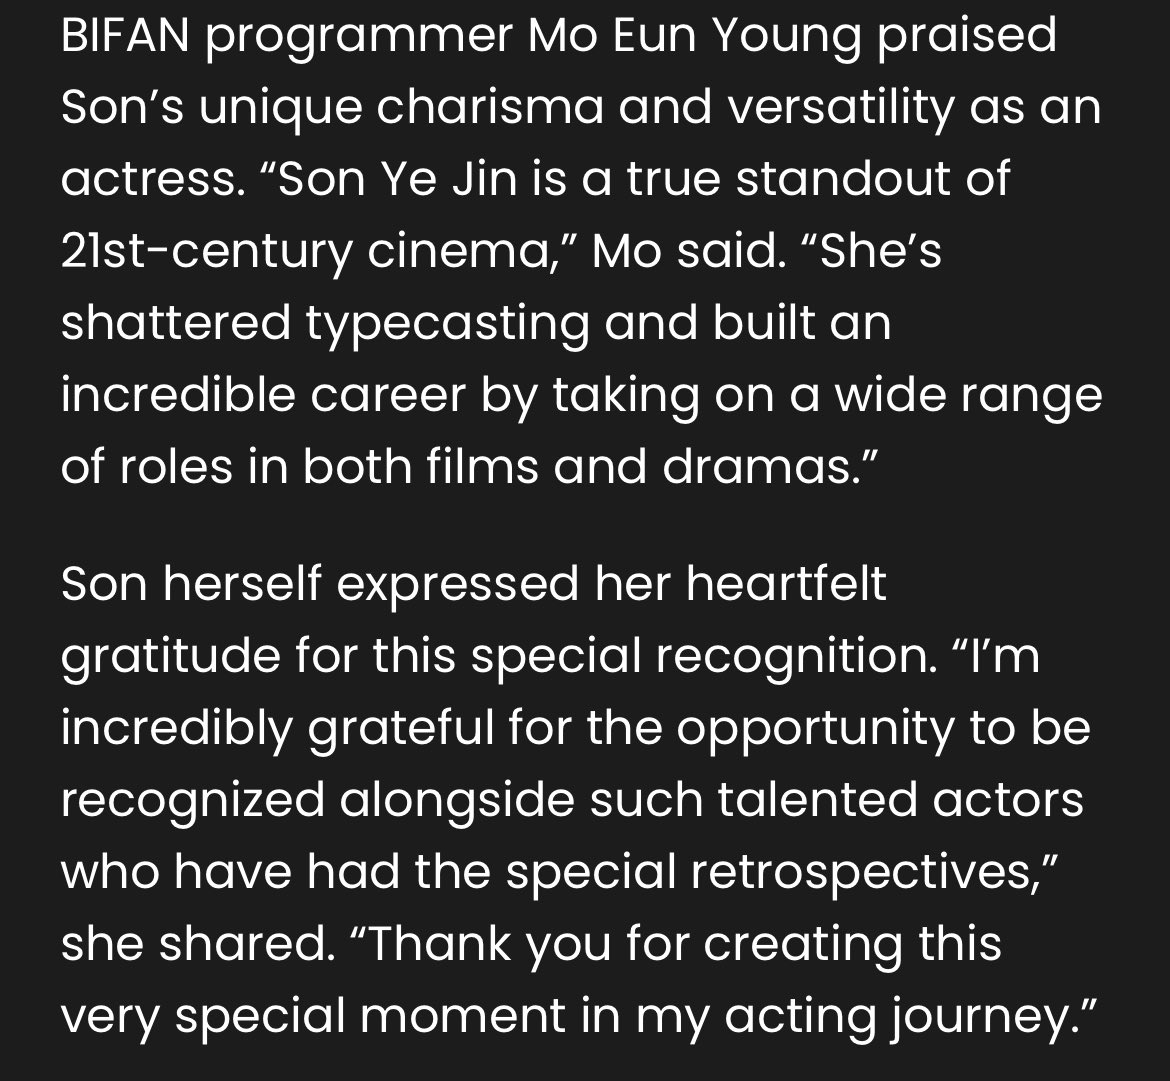 Son Yejin the unrivaled movie star of her generation